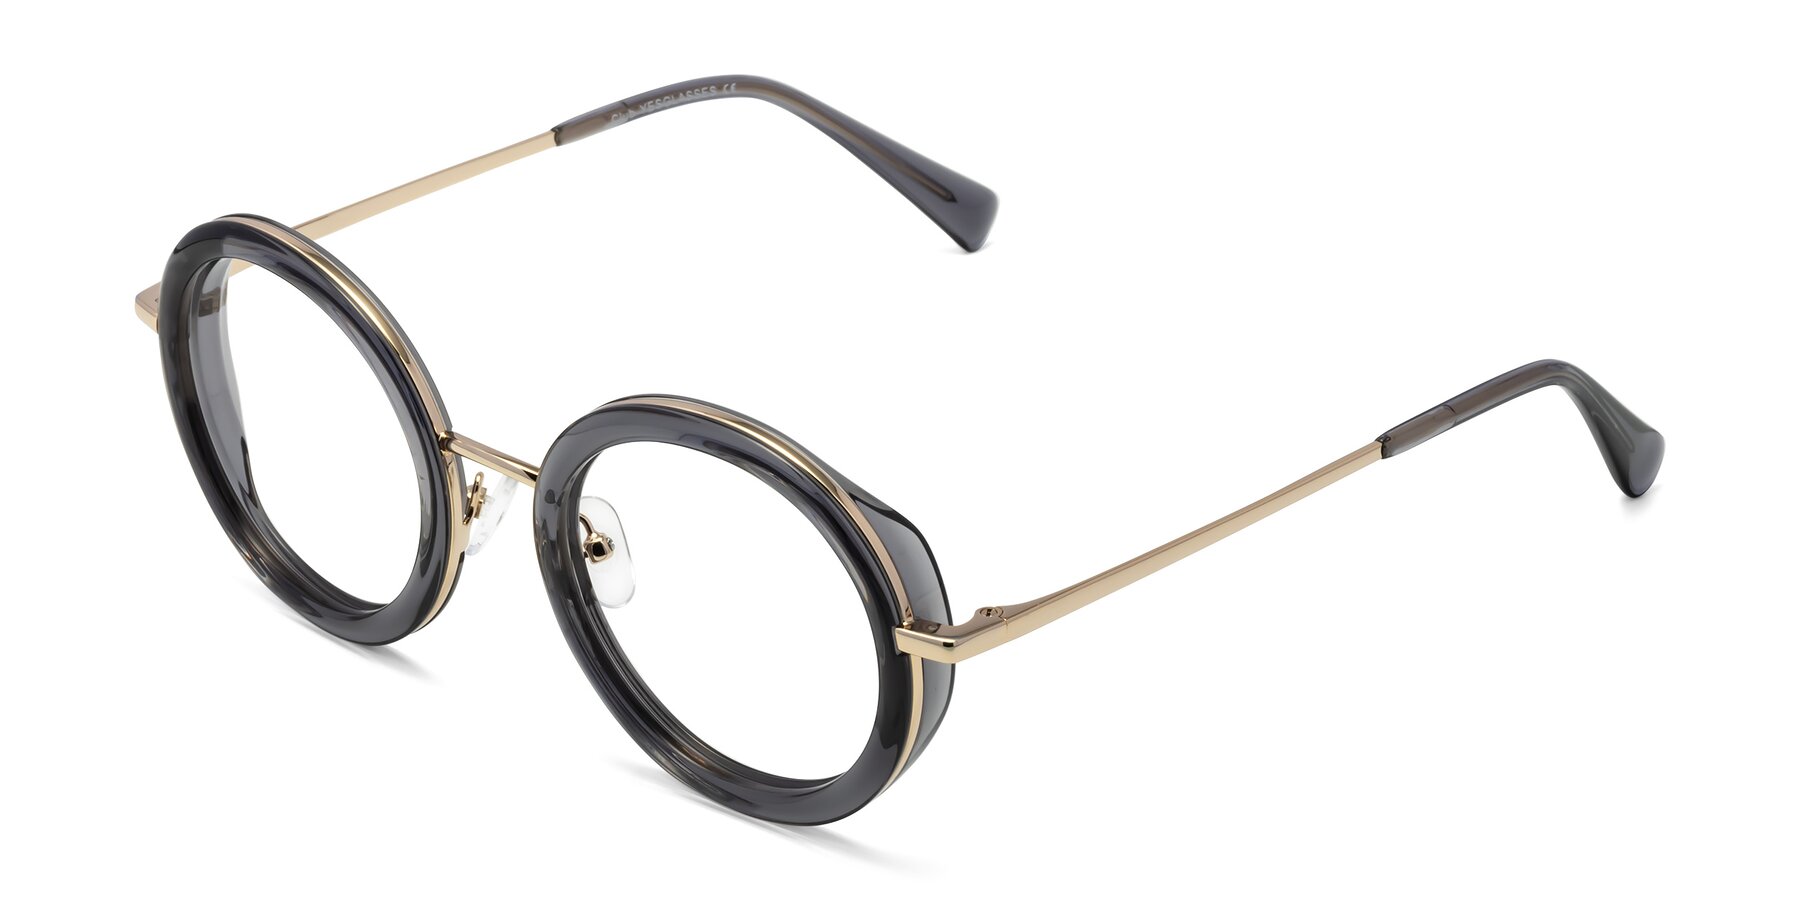 Angle of Club in Gray-Gold with Clear Eyeglass Lenses